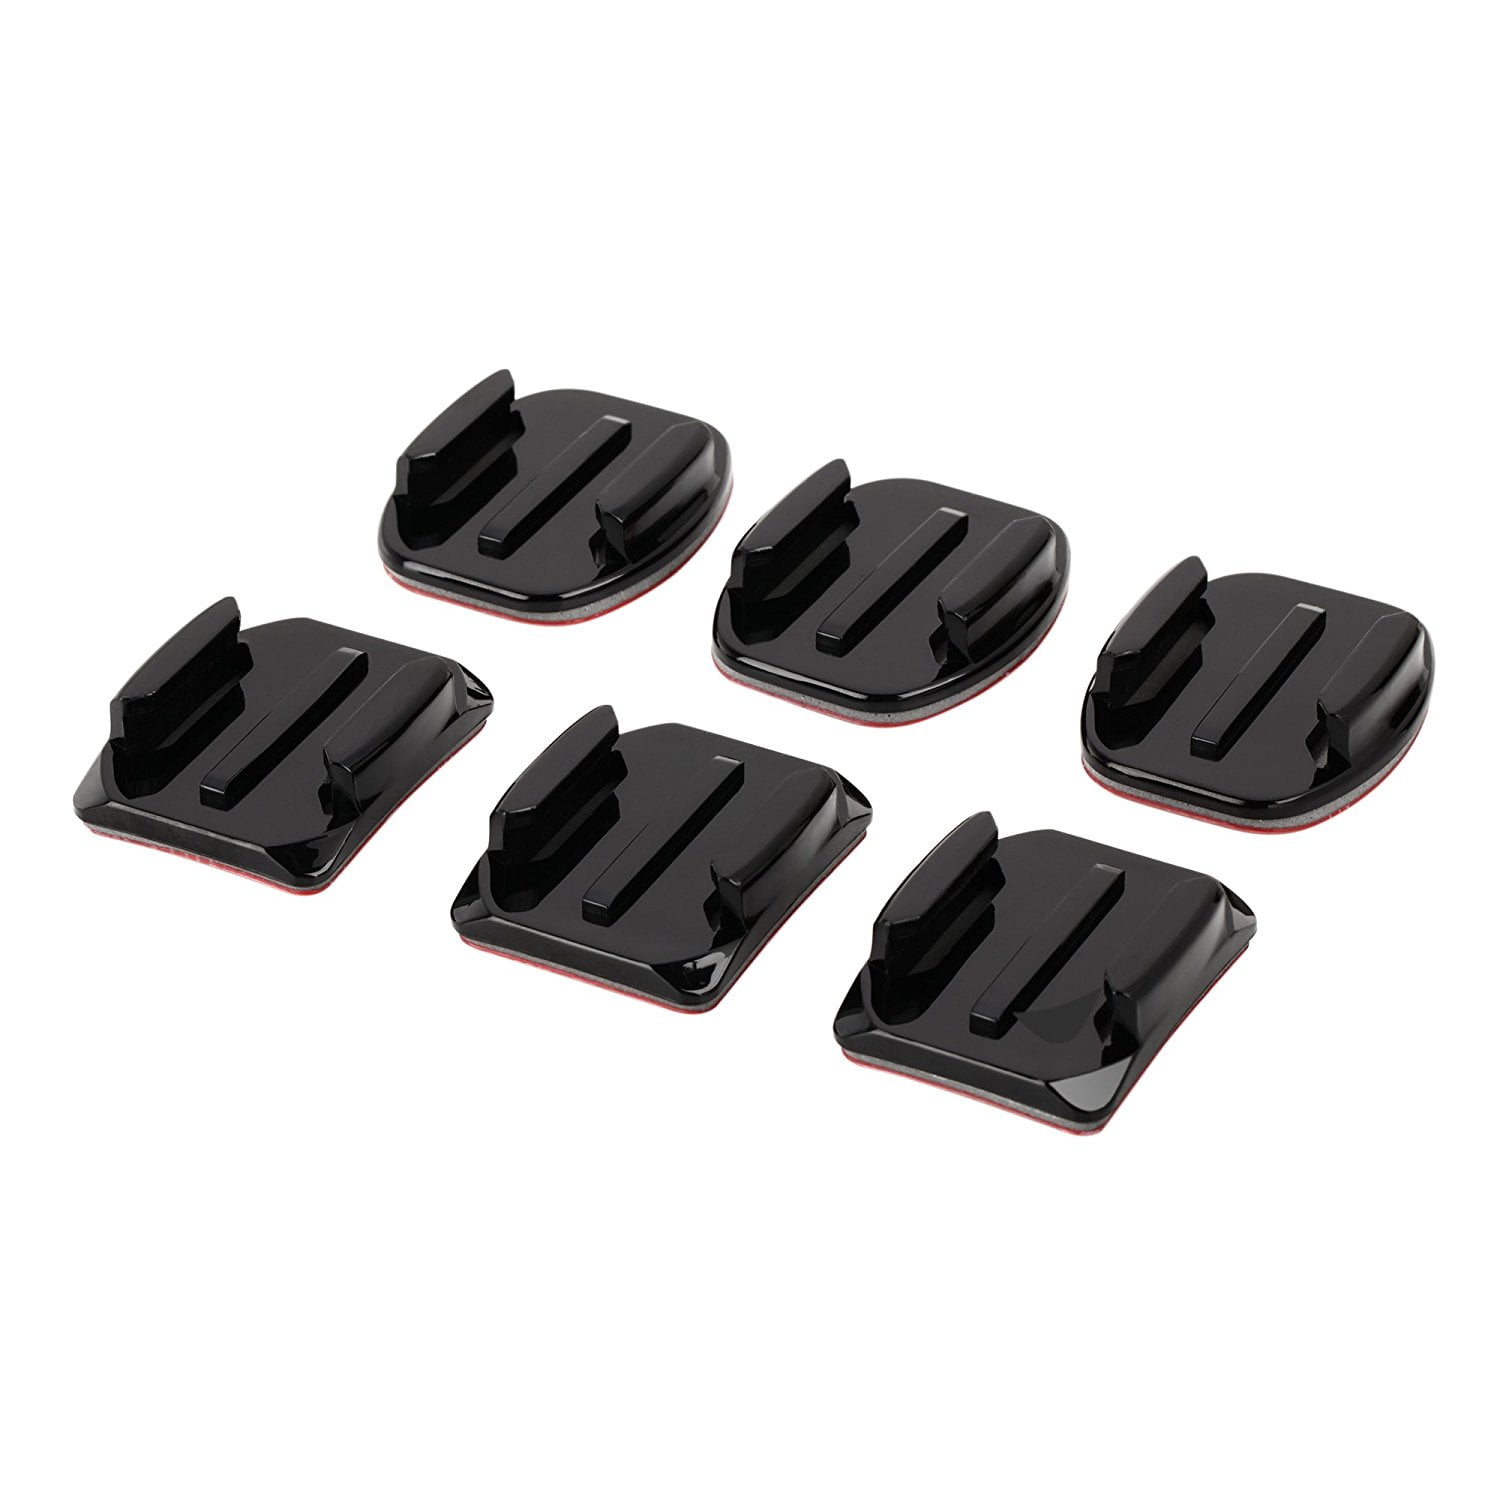 4x Flat & Curved Helmet Mounts 3M Adhesive Pads for GoPro Hero 2/3+/4/5/6 Camera 